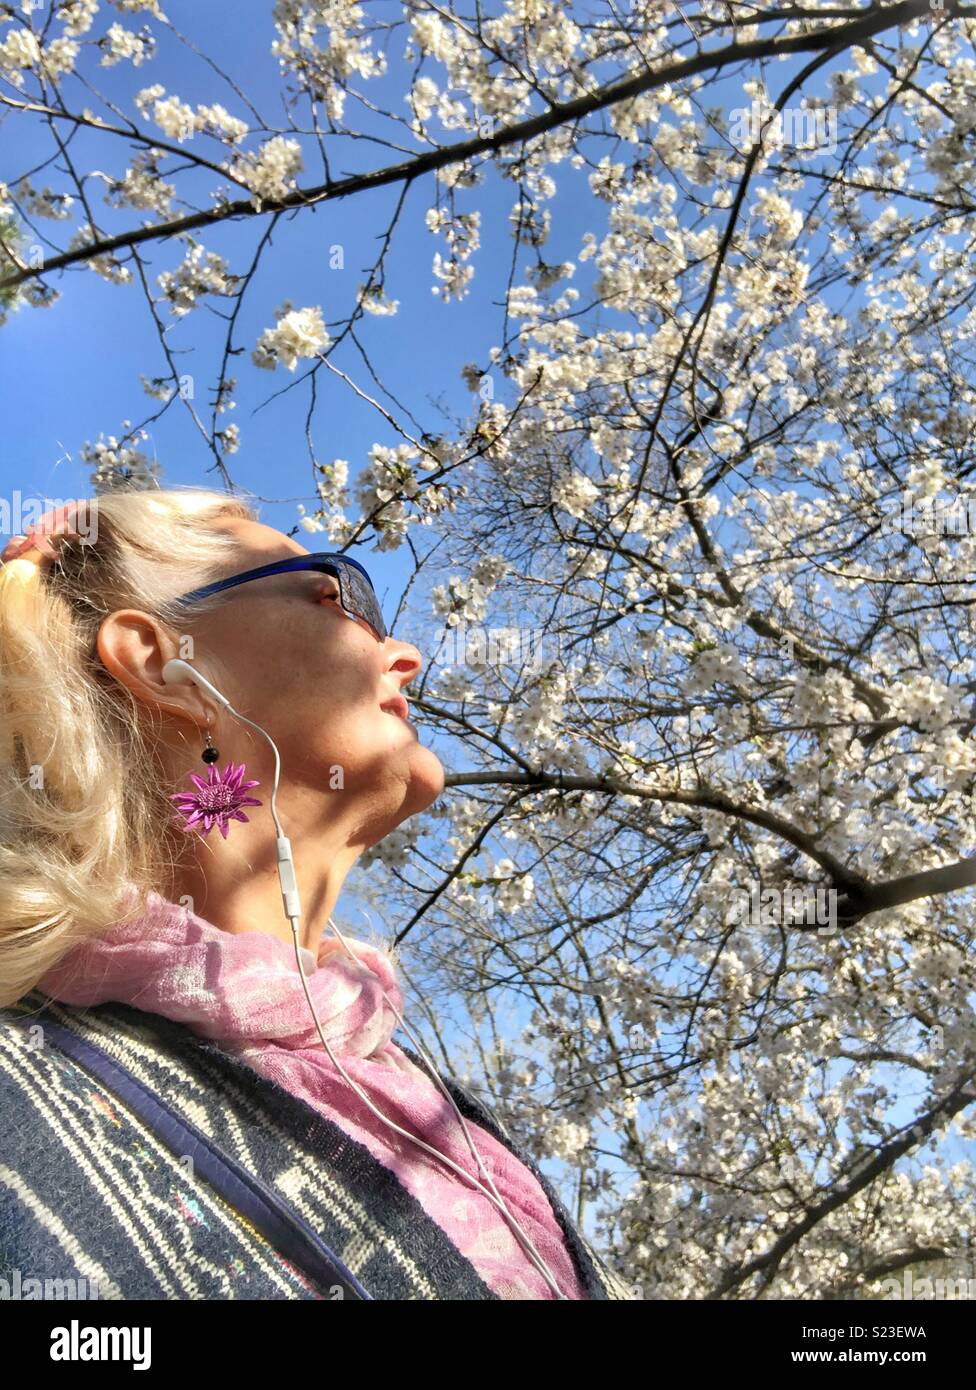 Woman looking up at the cherry blossoms. Stock Photo